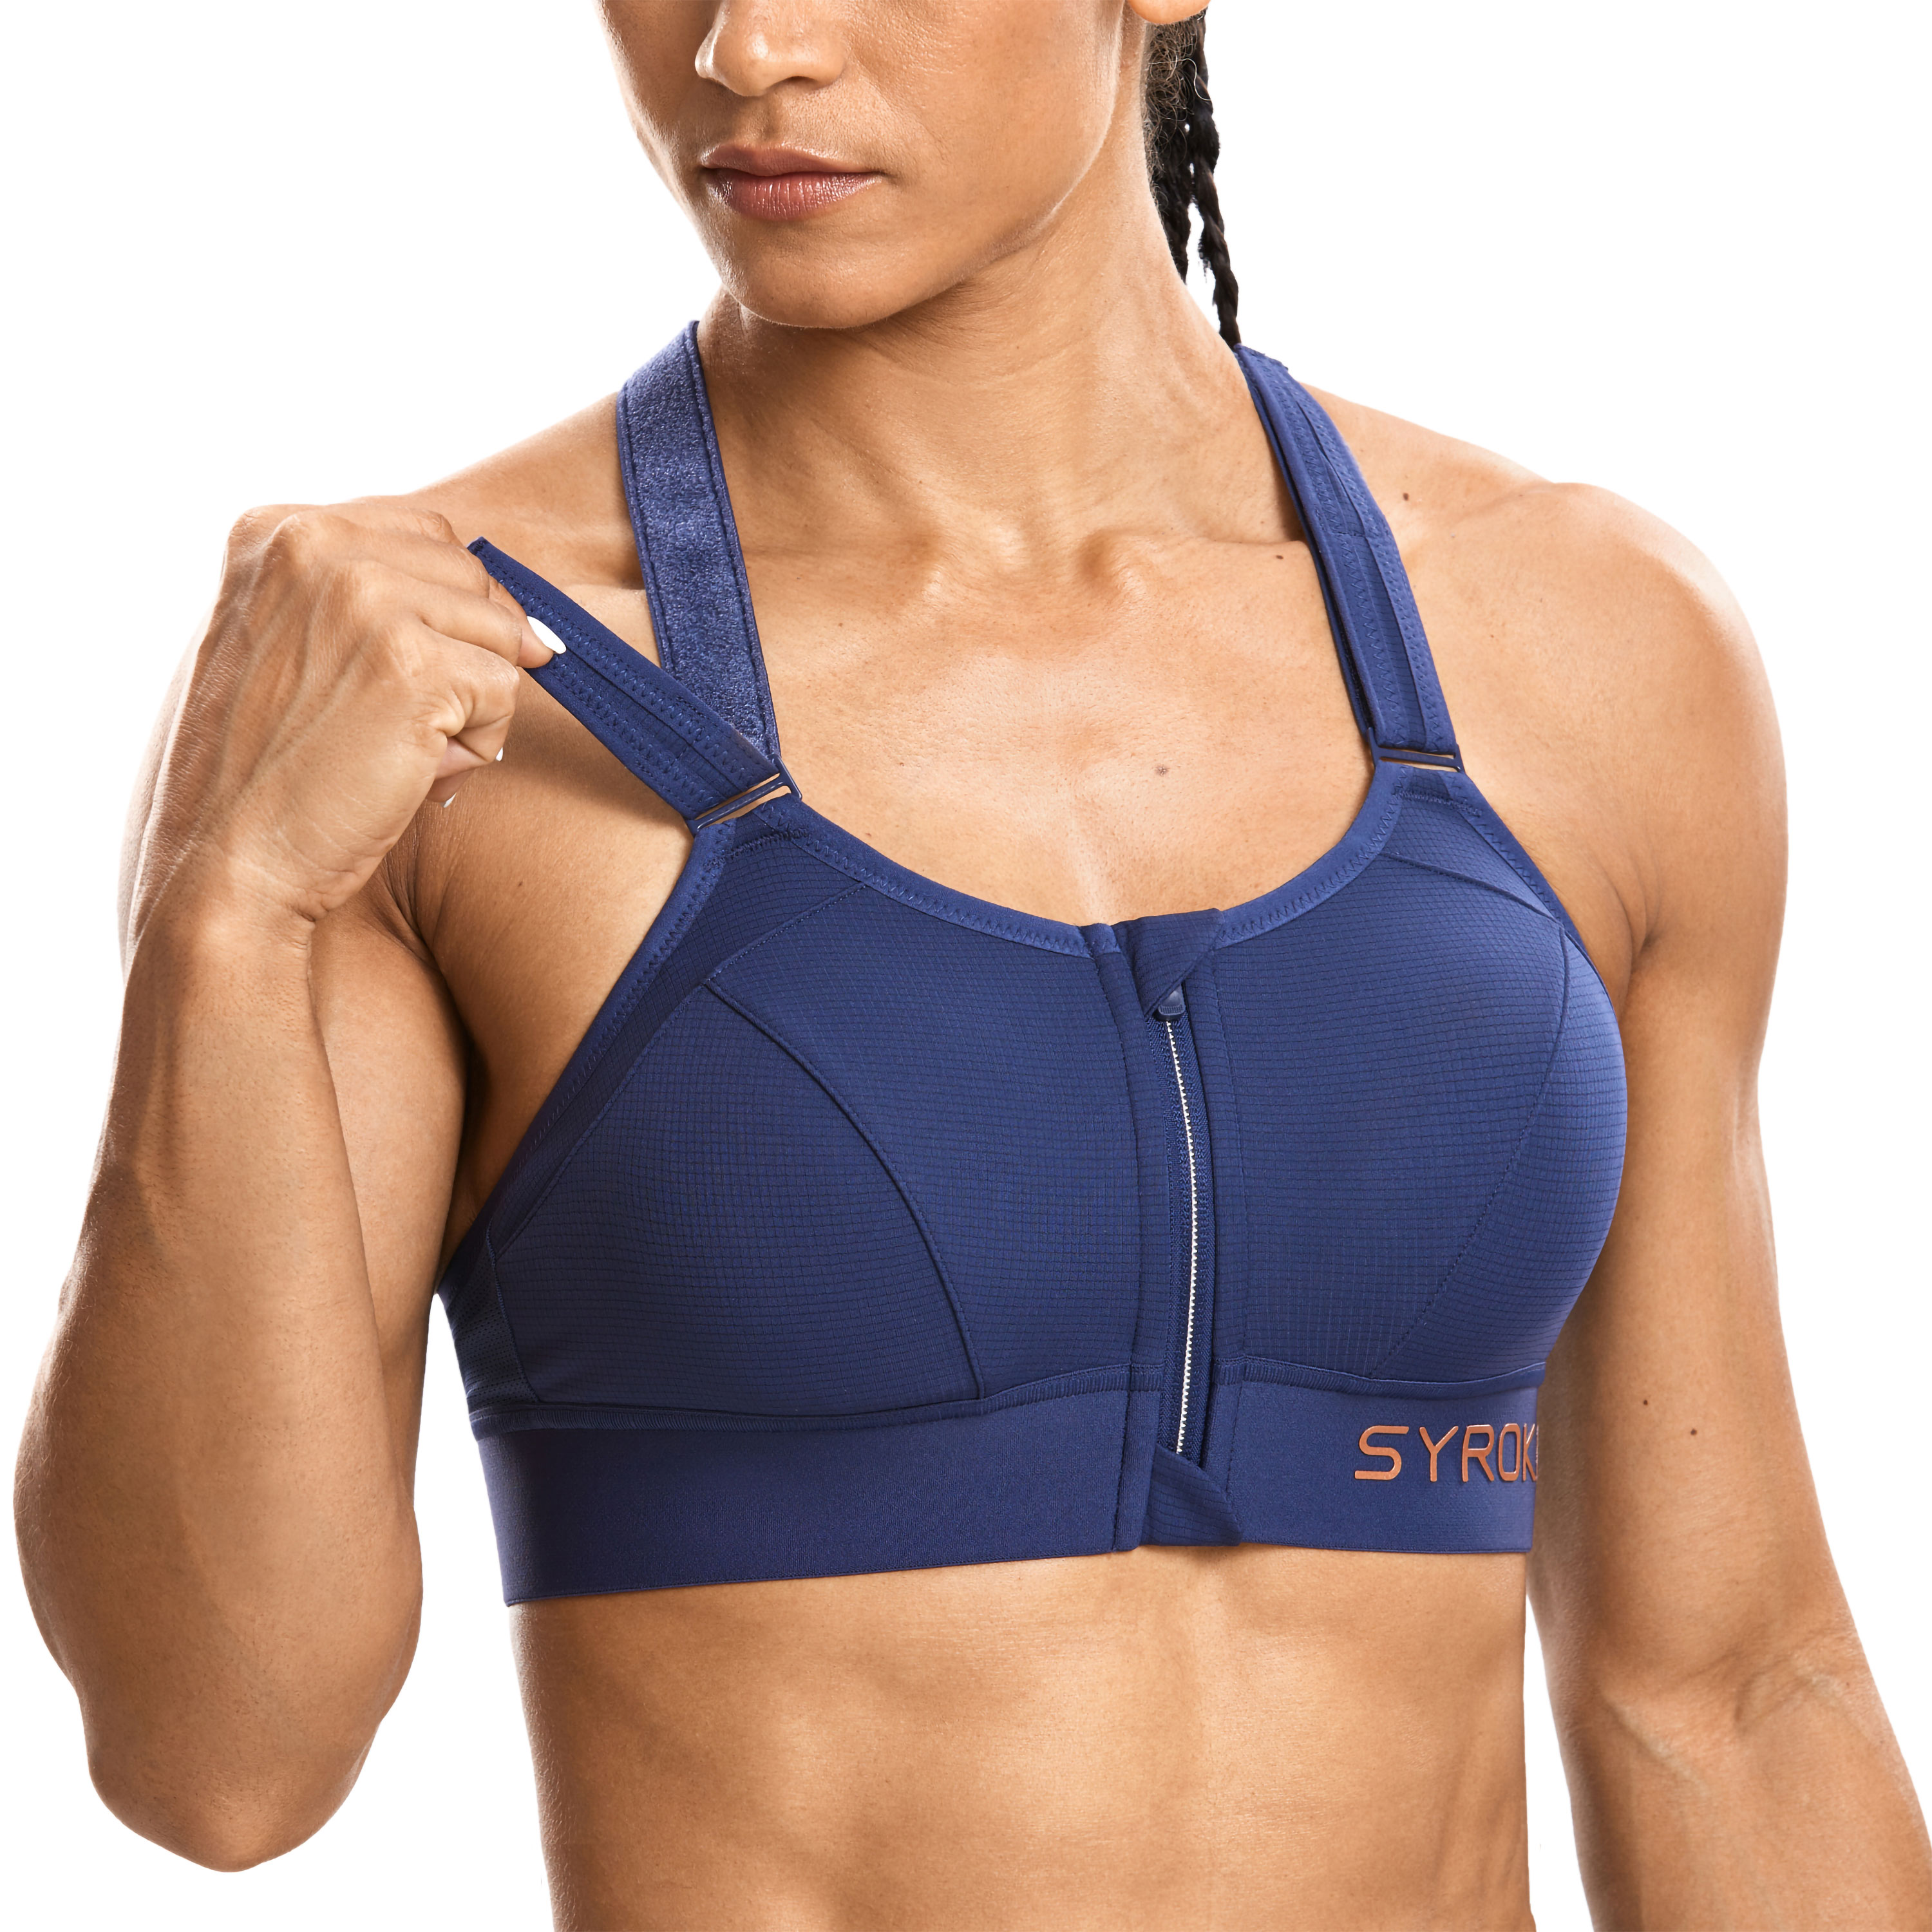 Womens Athletic High Impact Sports Bras for Women Large Bust